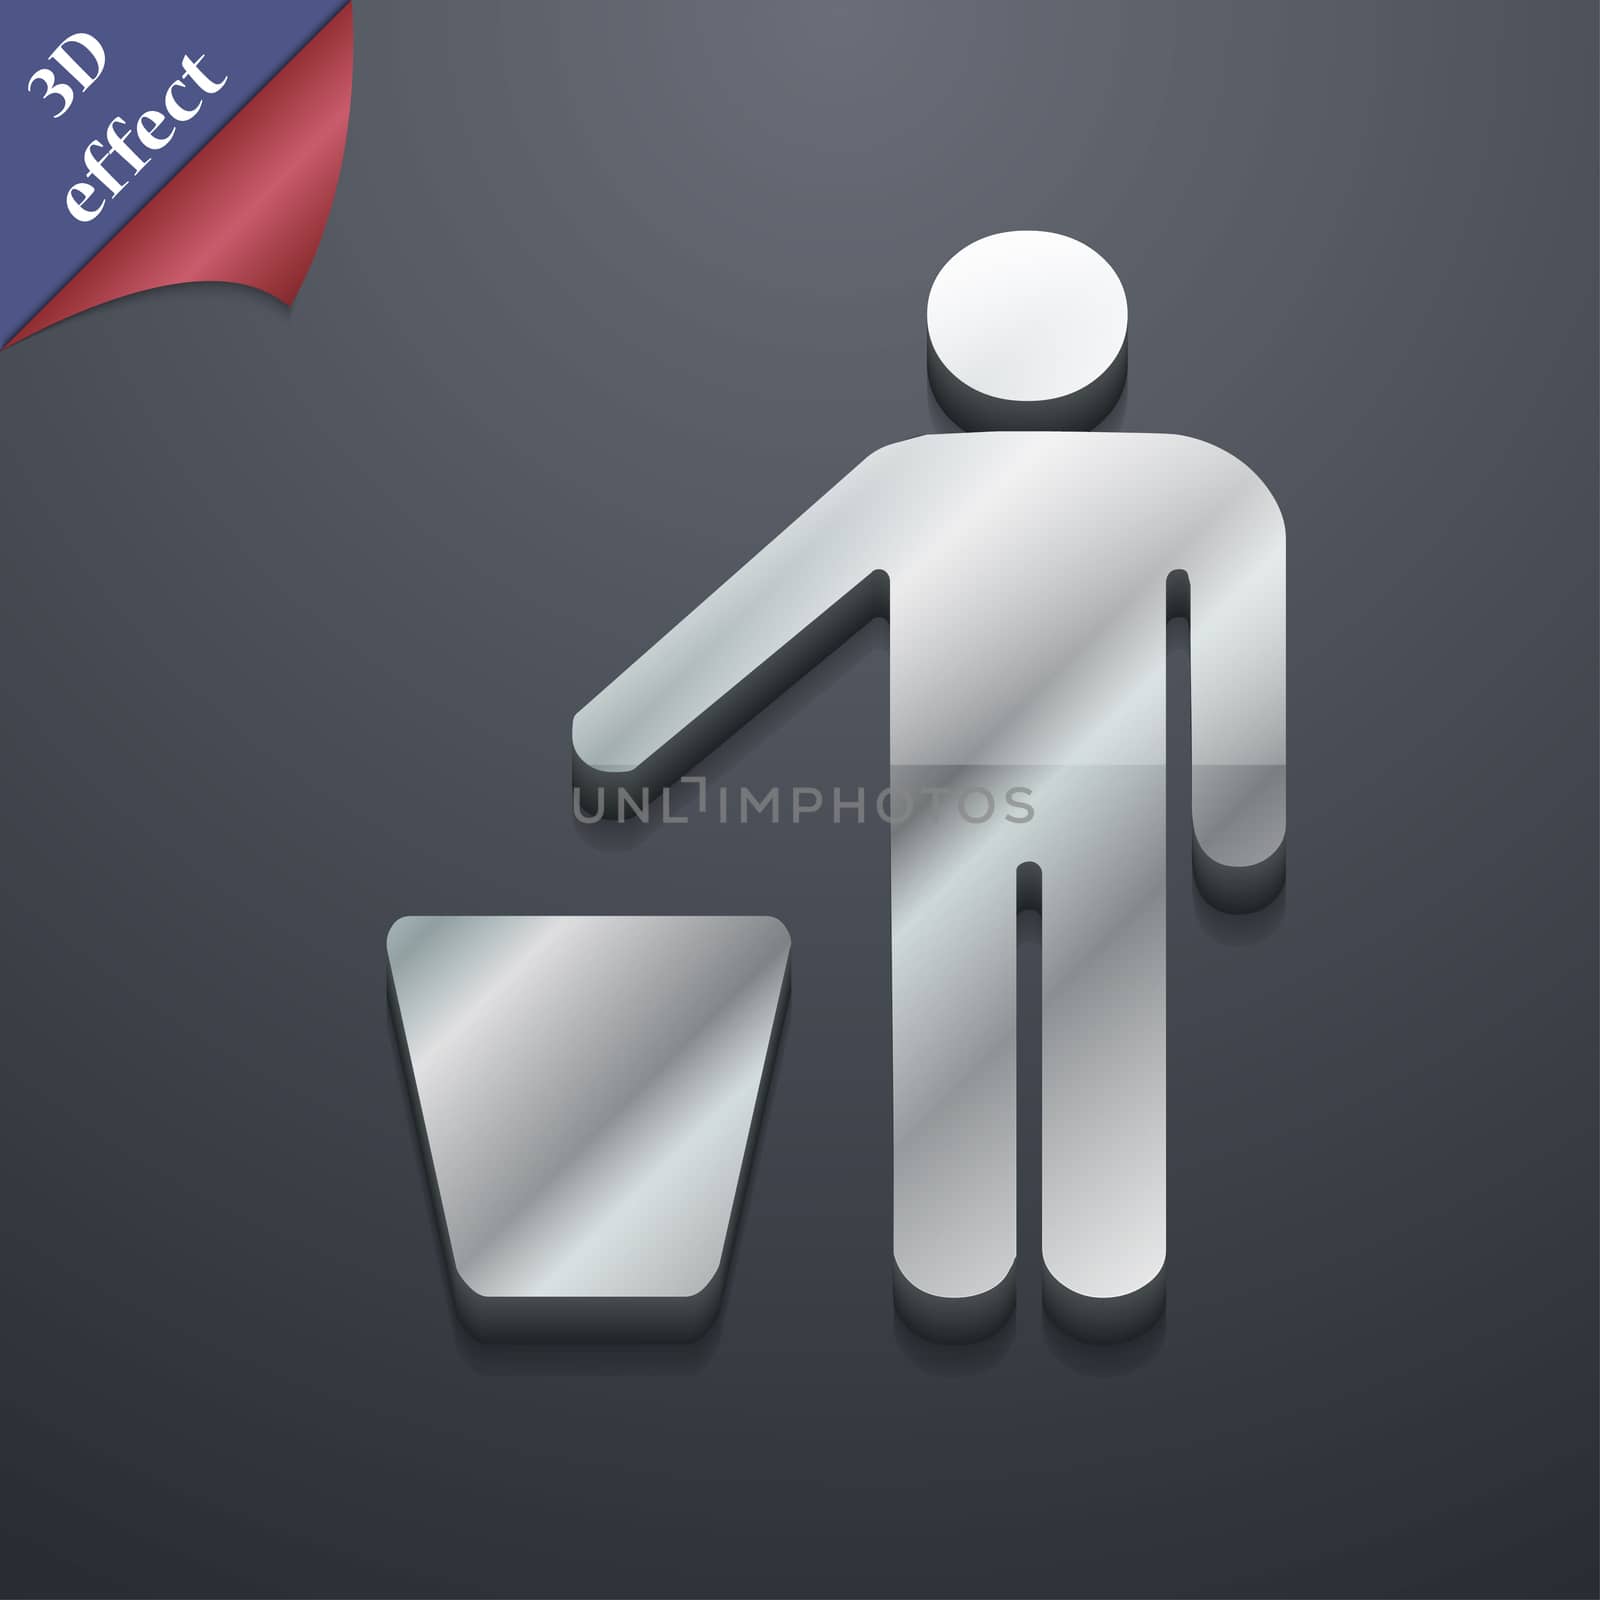 throw away the trash icon symbol. 3D style. Trendy, modern design with space for your text illustration. Rastrized copy